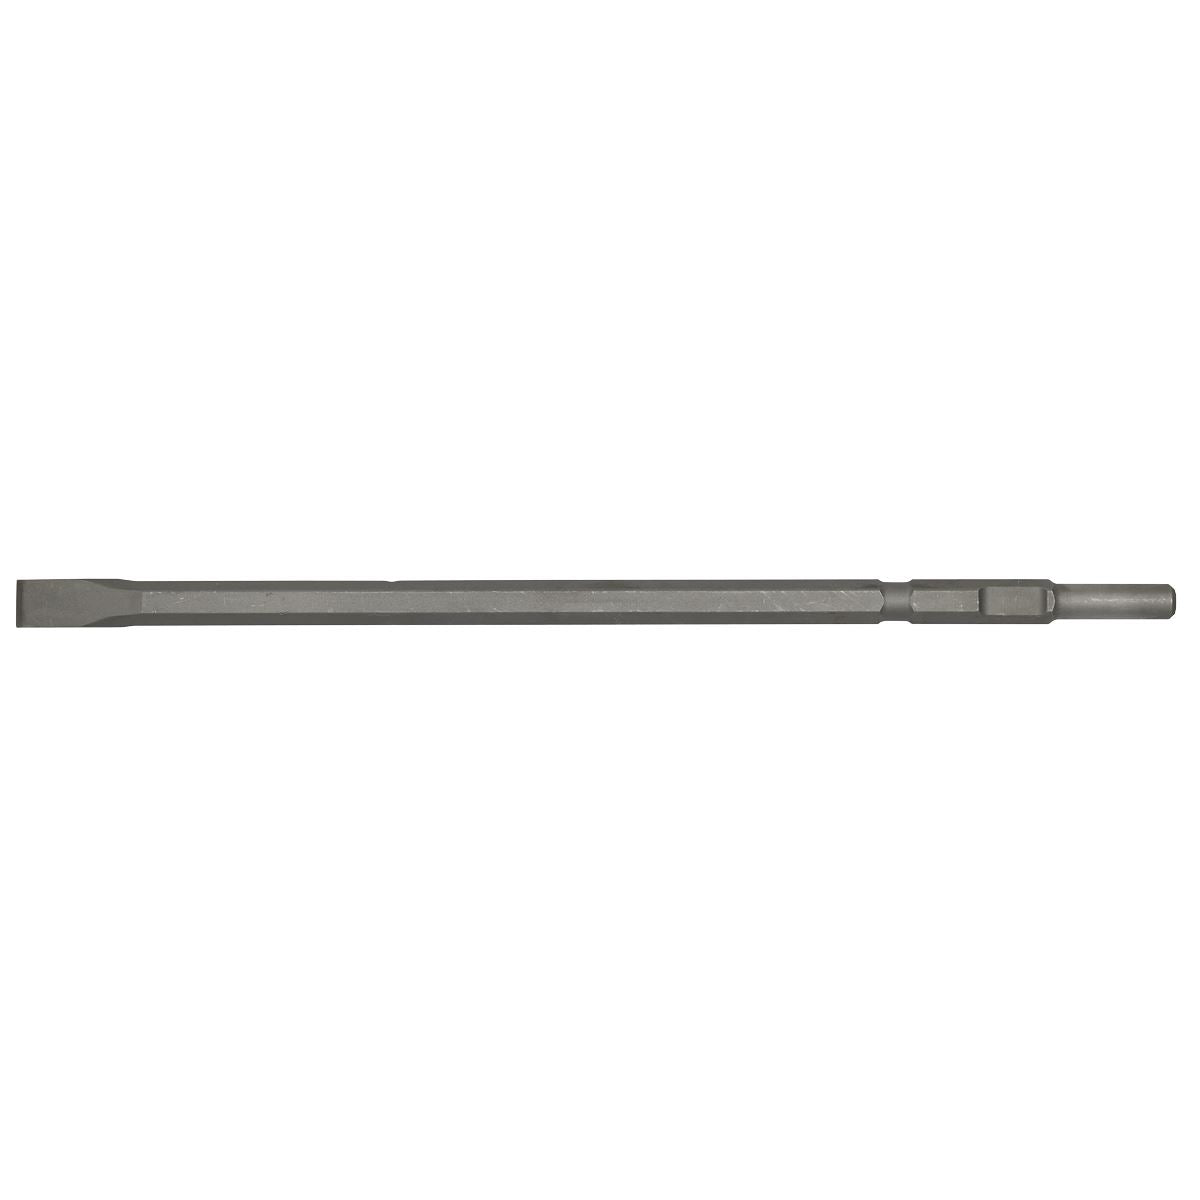 Worksafe by Sealey Chisel 35 x 600mm - Kango 900